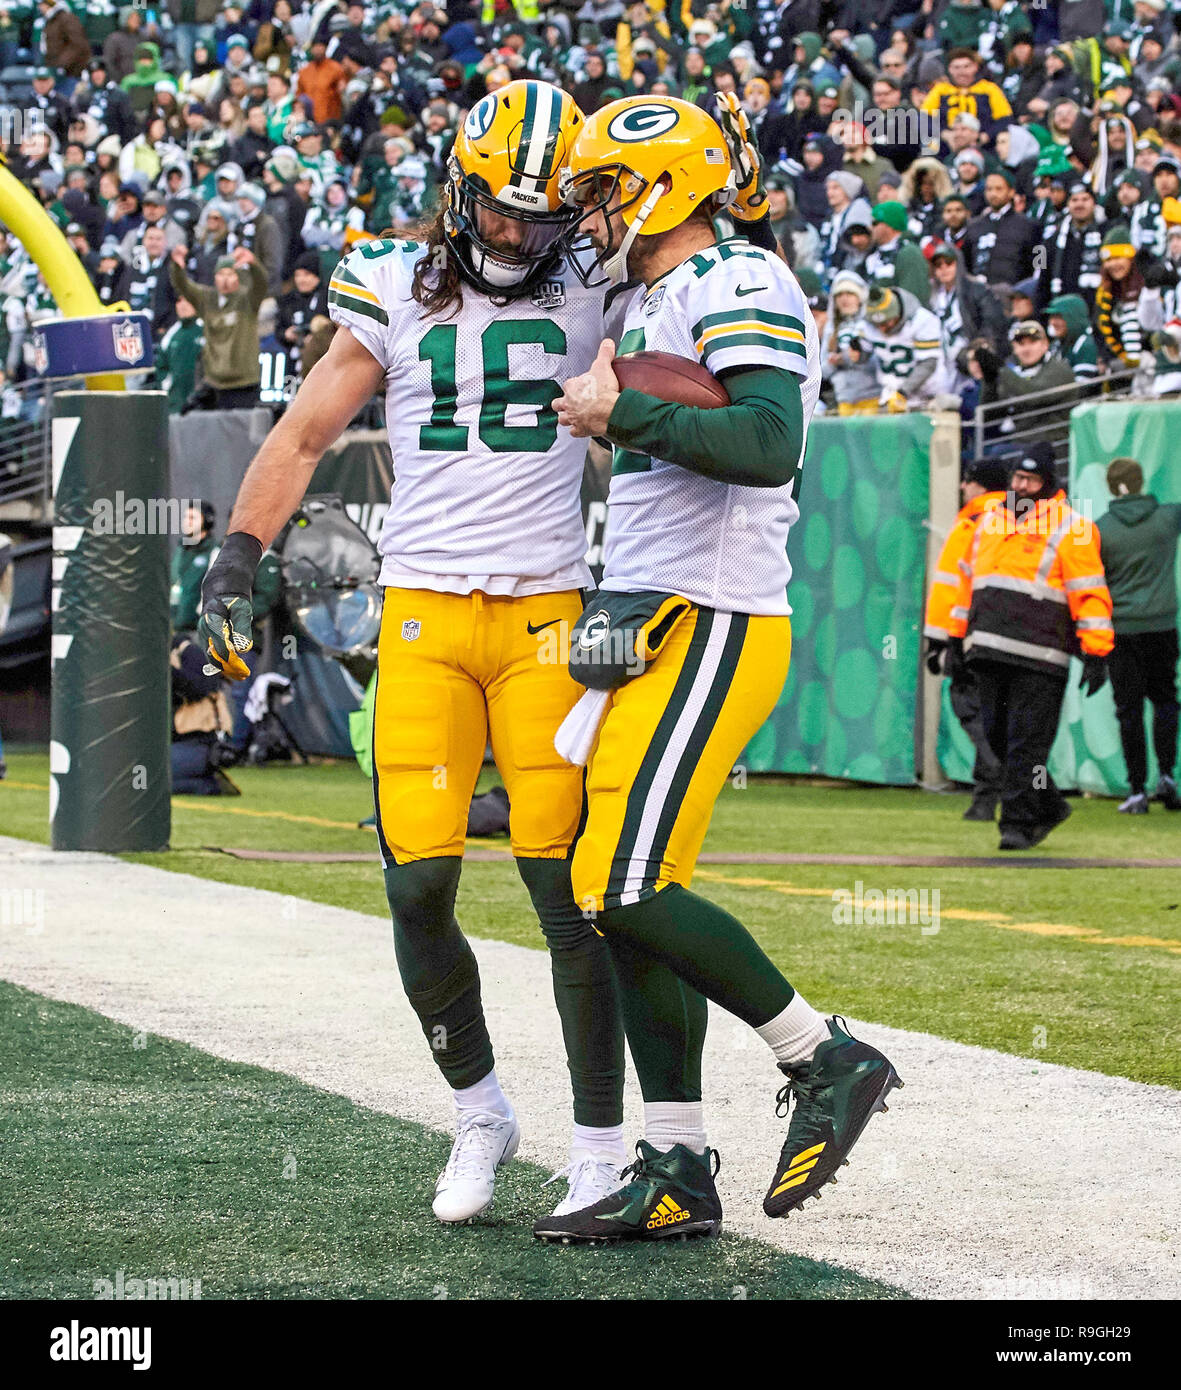 East Rutherford, New Jersey, USA. 23rd Dec, 2018. Green Bay Packers  quarterback Aaron Rodgers (12) celebrates with wide receiver Jake Kumerow  (16) after scoring a touchdown during a NFL game between the